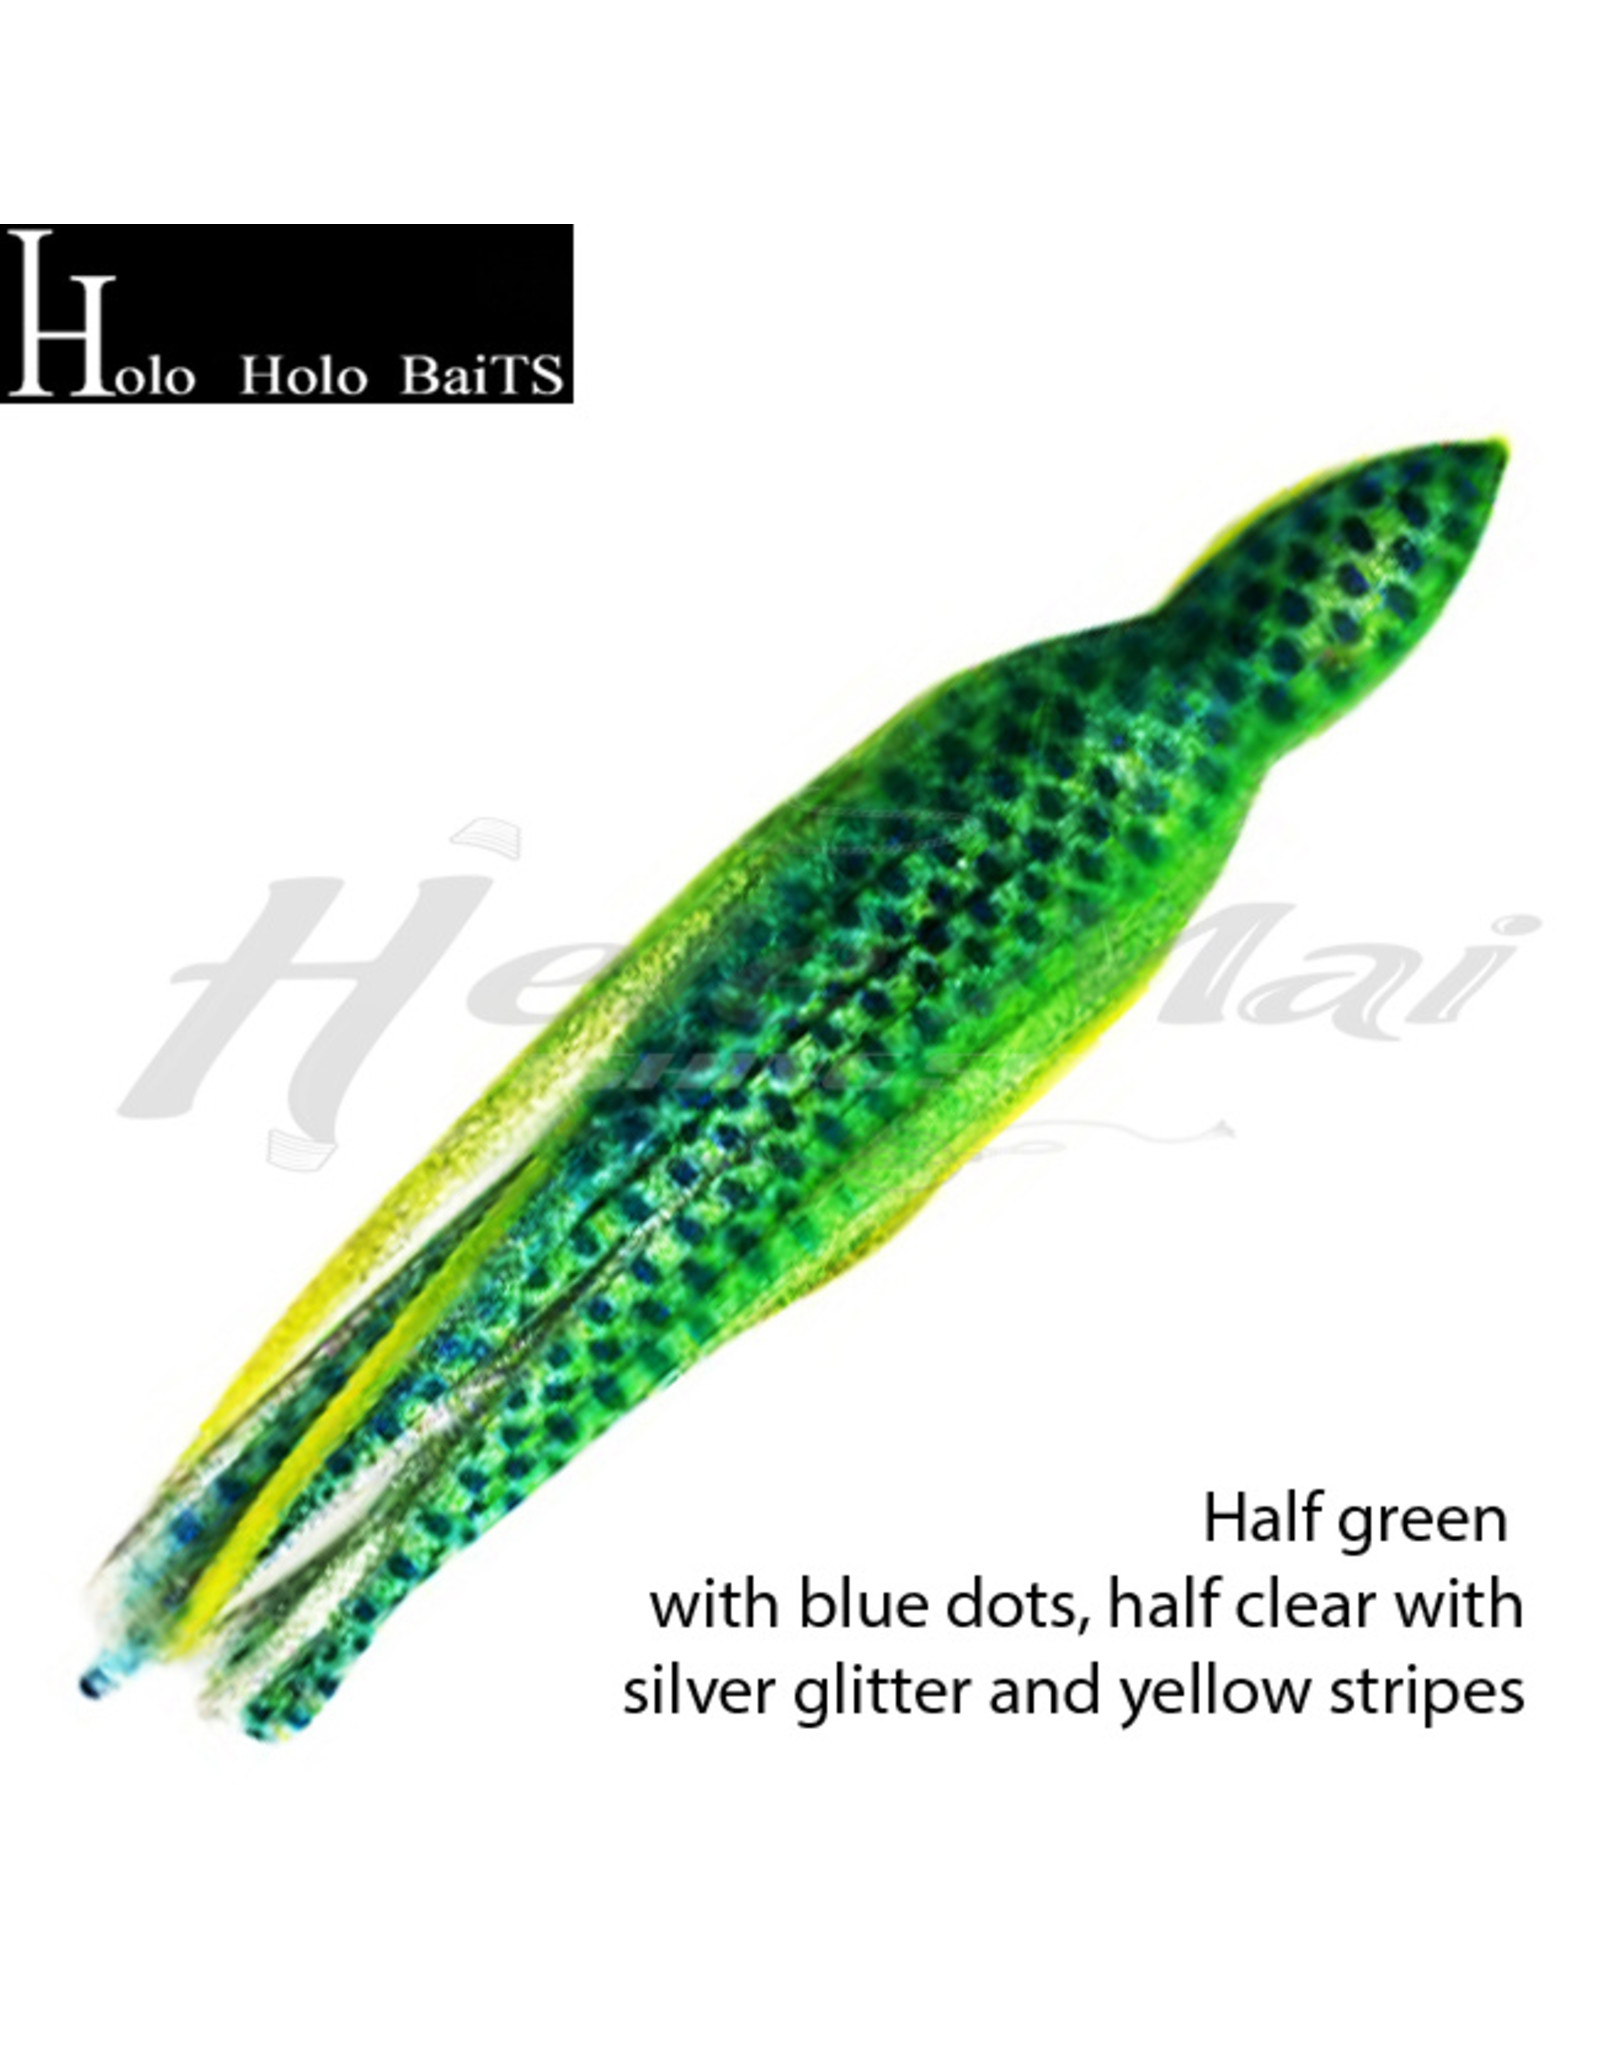 HOLO HOLO HAWAII (HHH) HH, 7" SQUID SKIRT FROG GREEN DOTS 0005